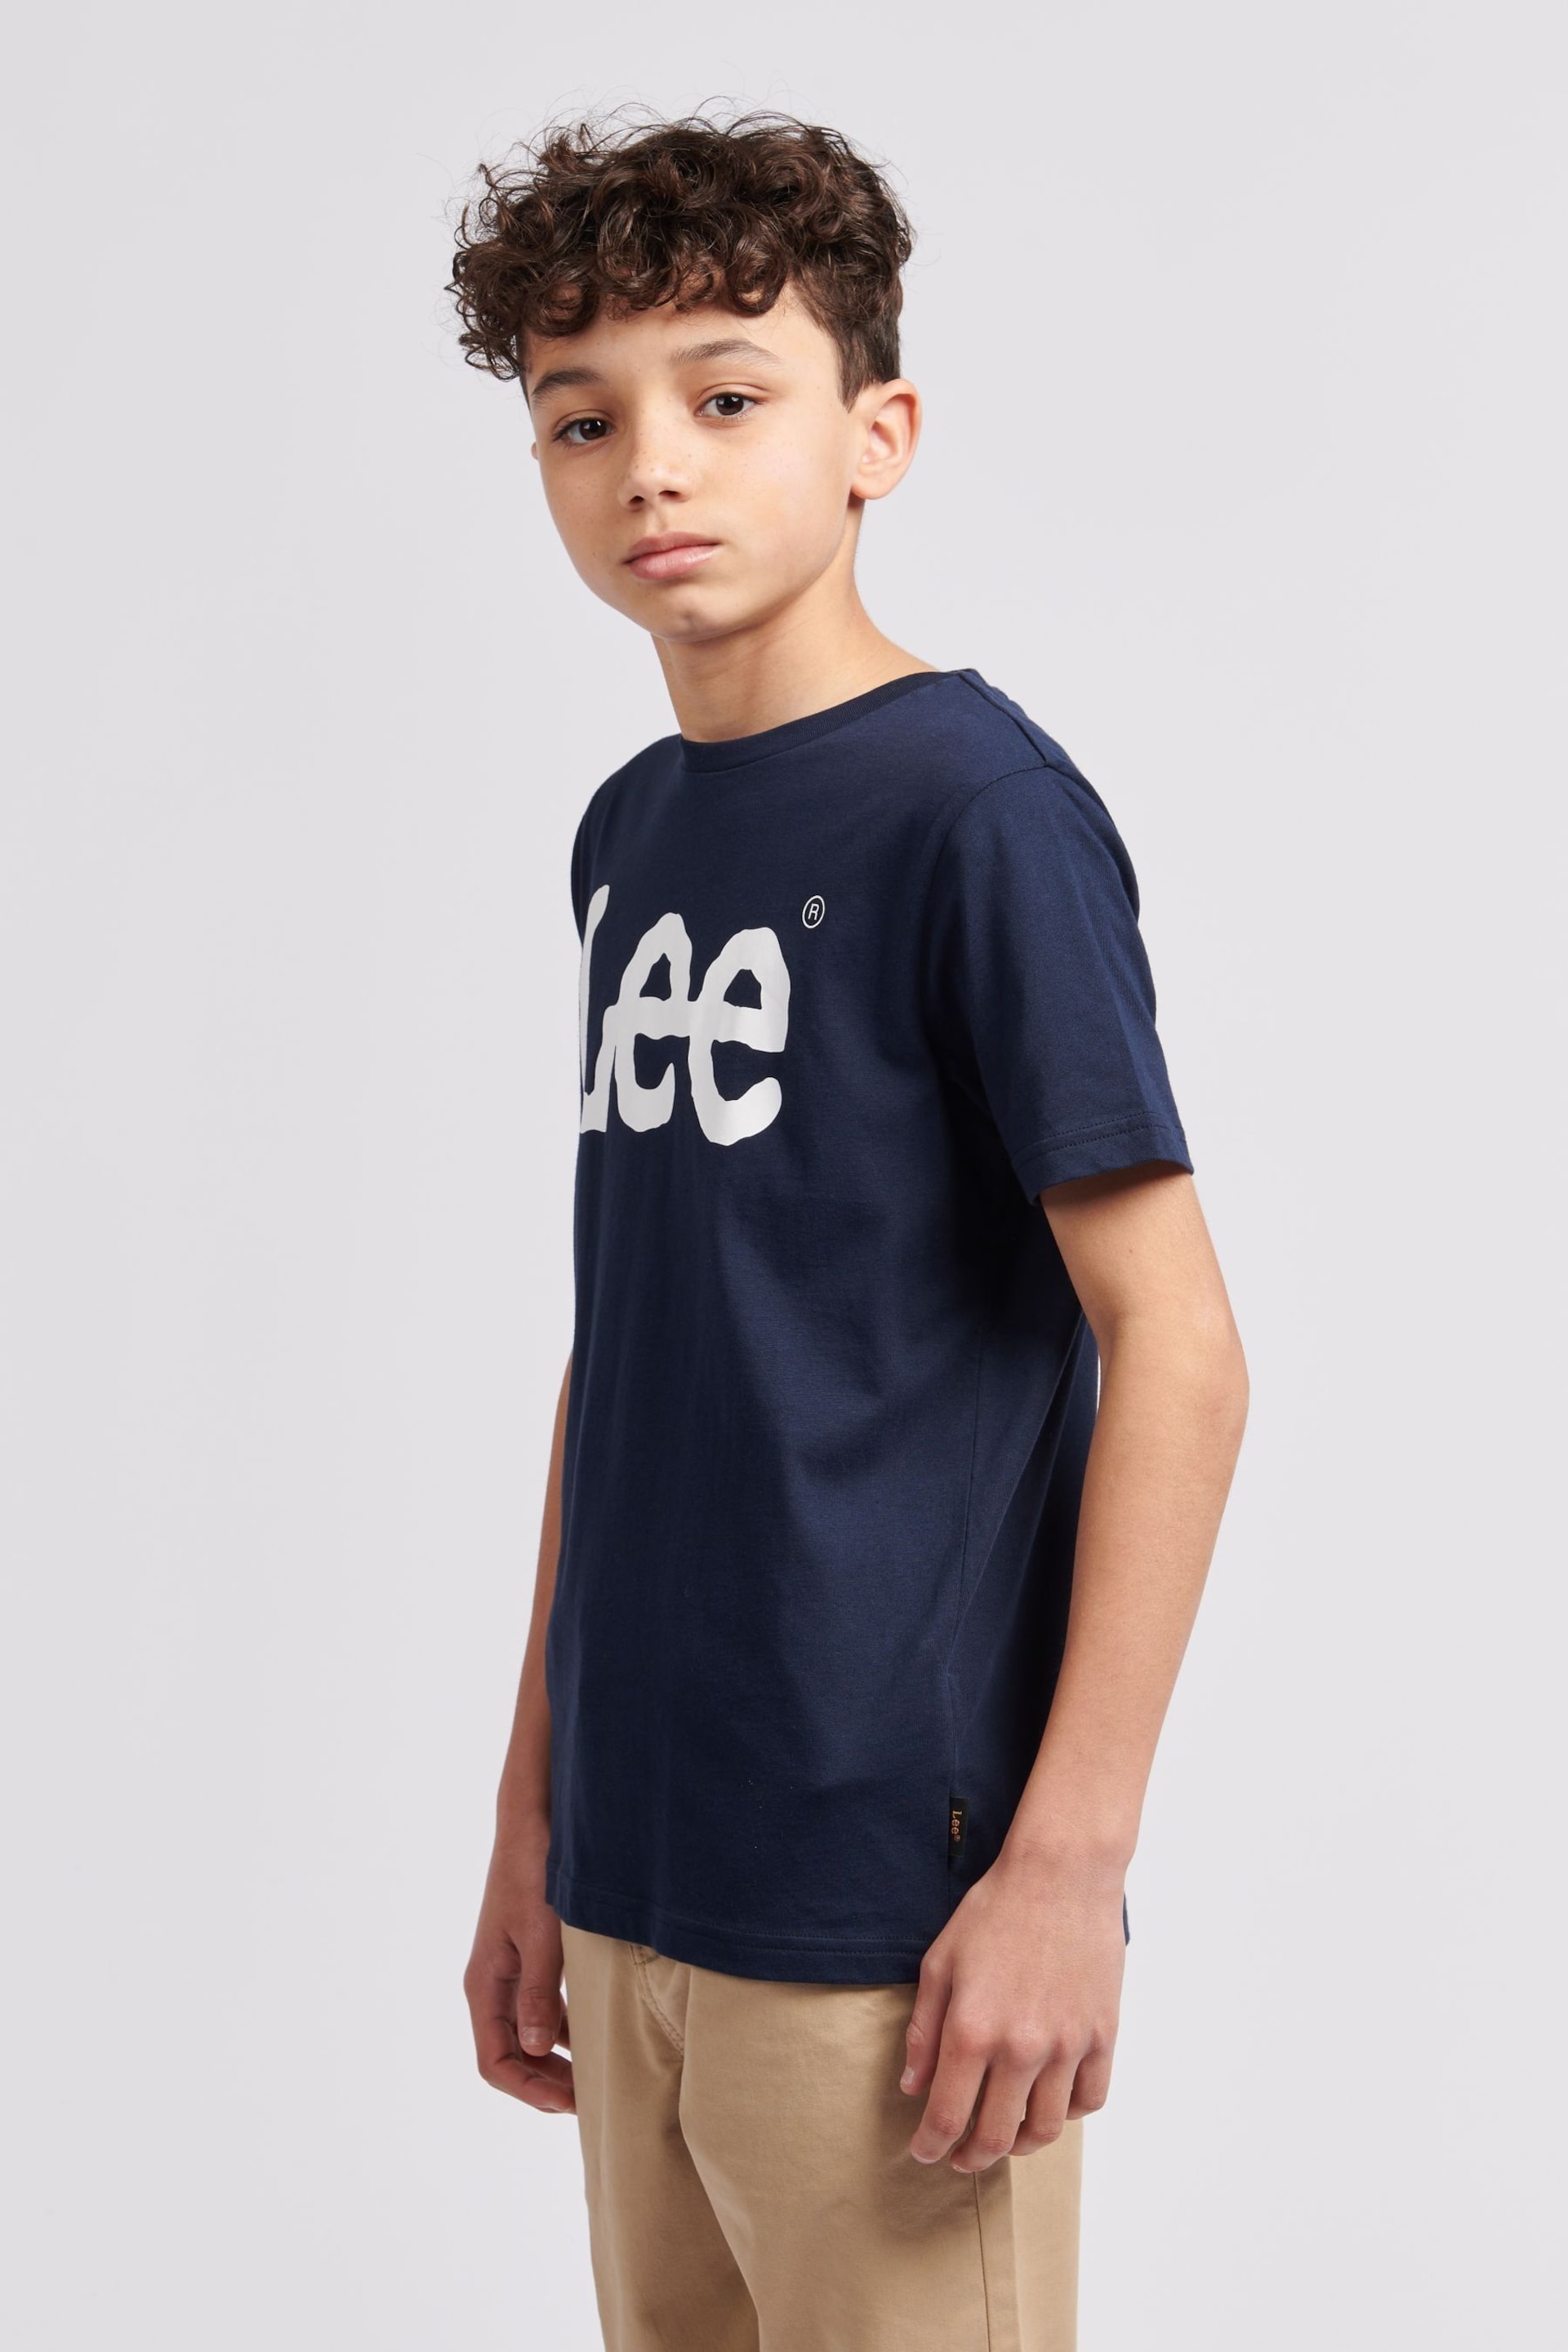 Lee Boys Wobbly Graphic T-Shirt - Image 6 of 9